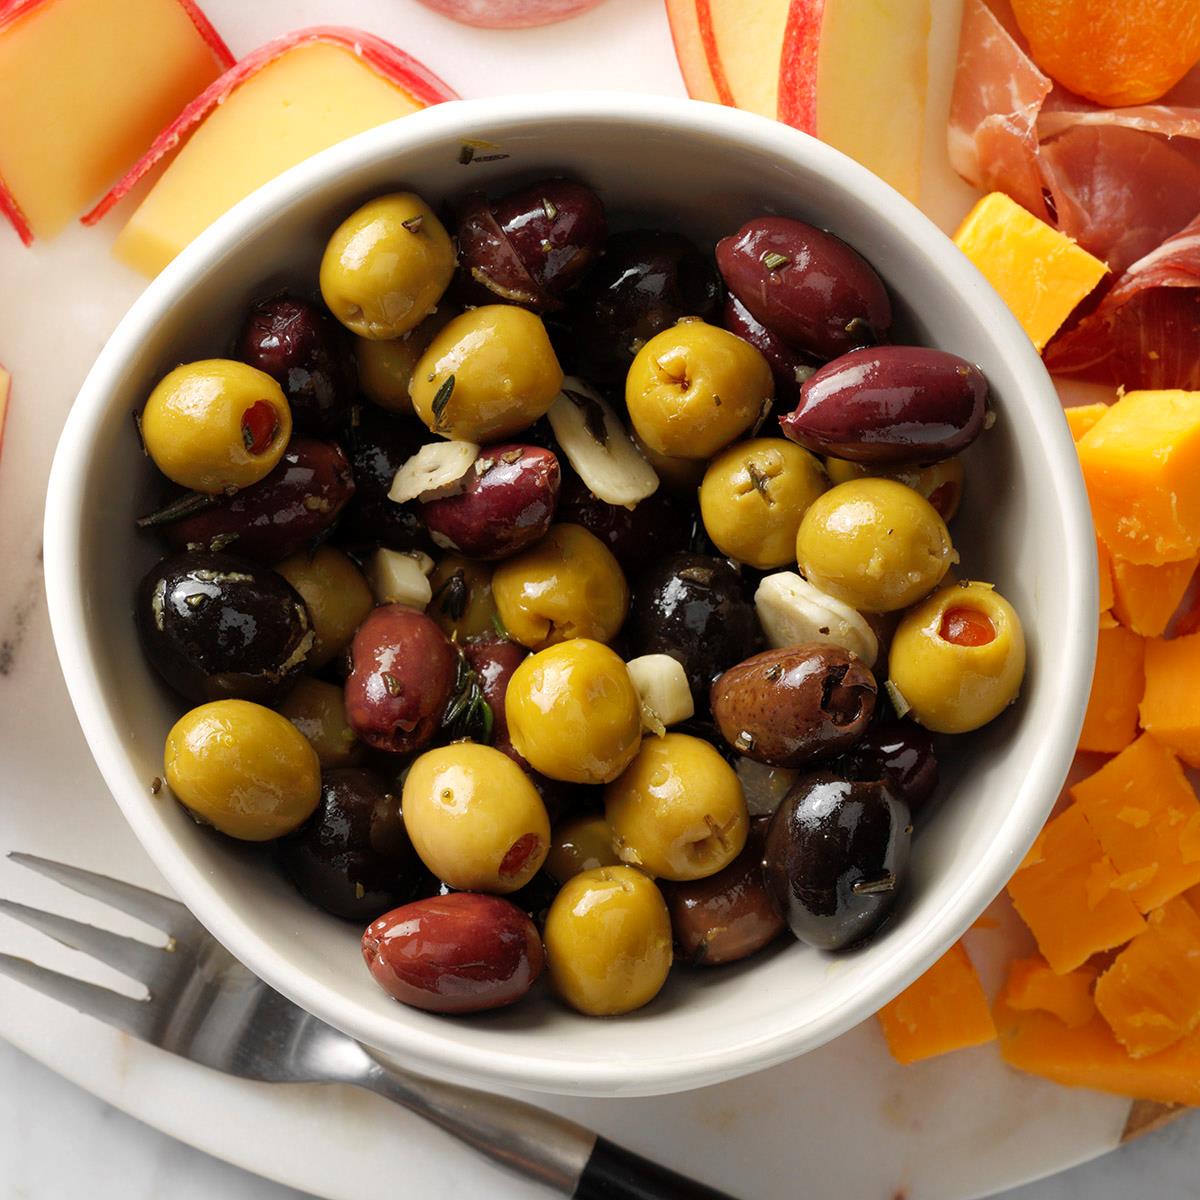 Olives are something I can never enjoy. But I love olive oil. -TheShoot141